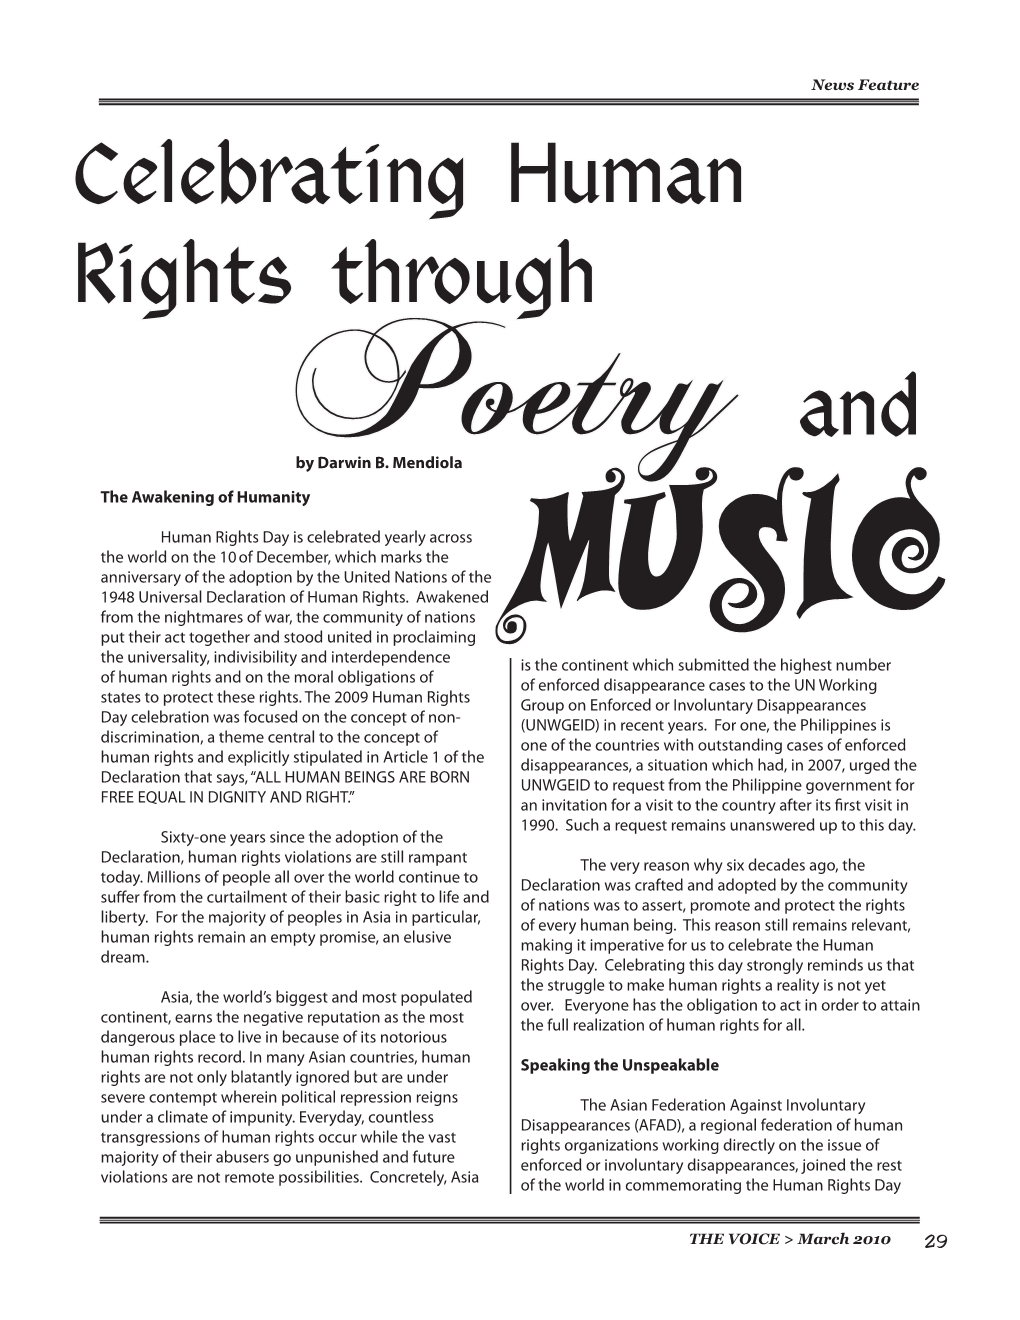 Celebrating Human Rights Through and Poetryby Darwin B